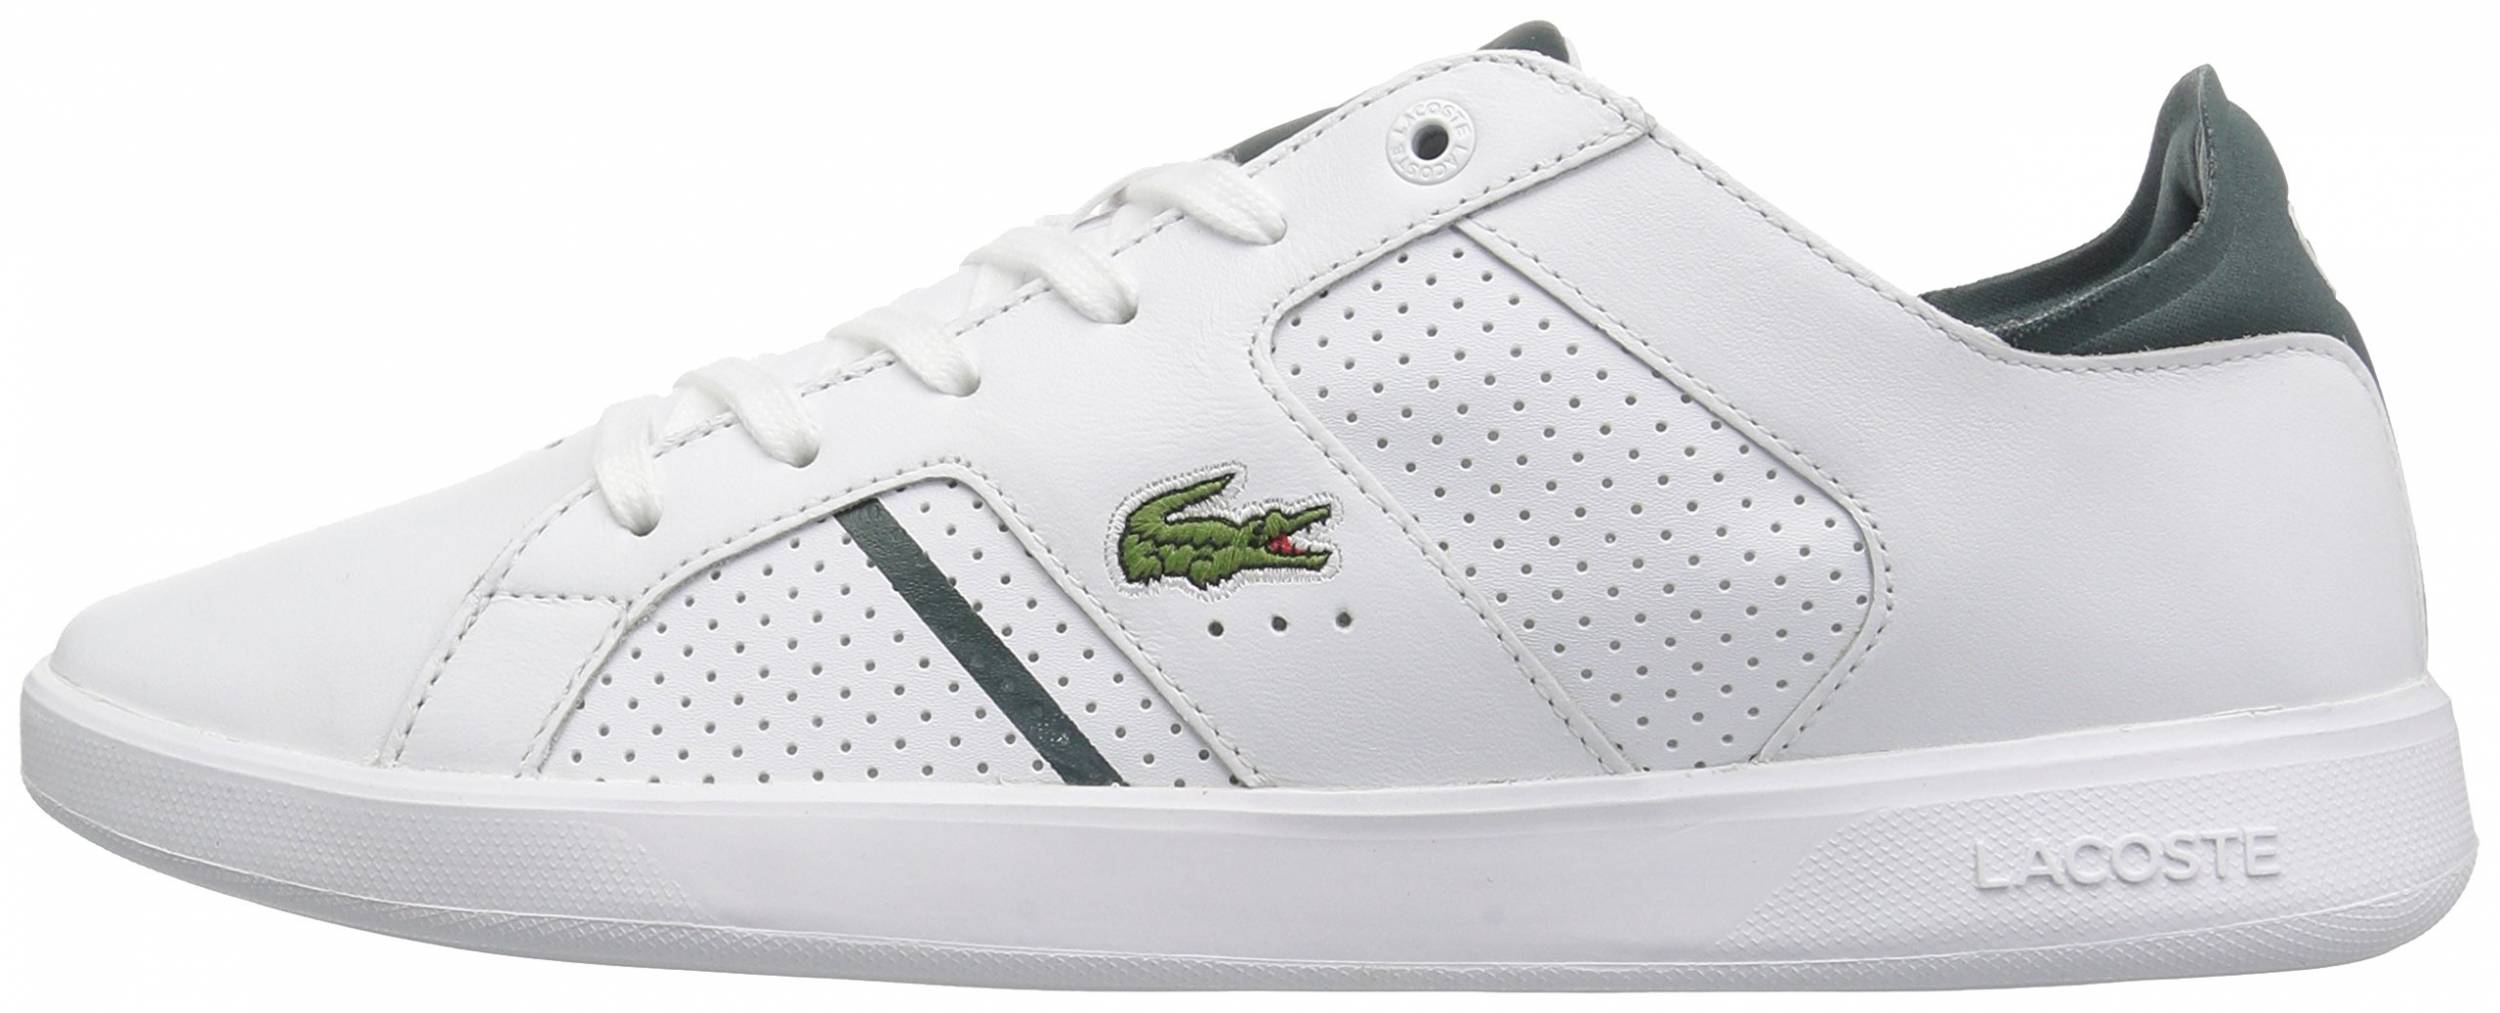 lacoste sports shoes